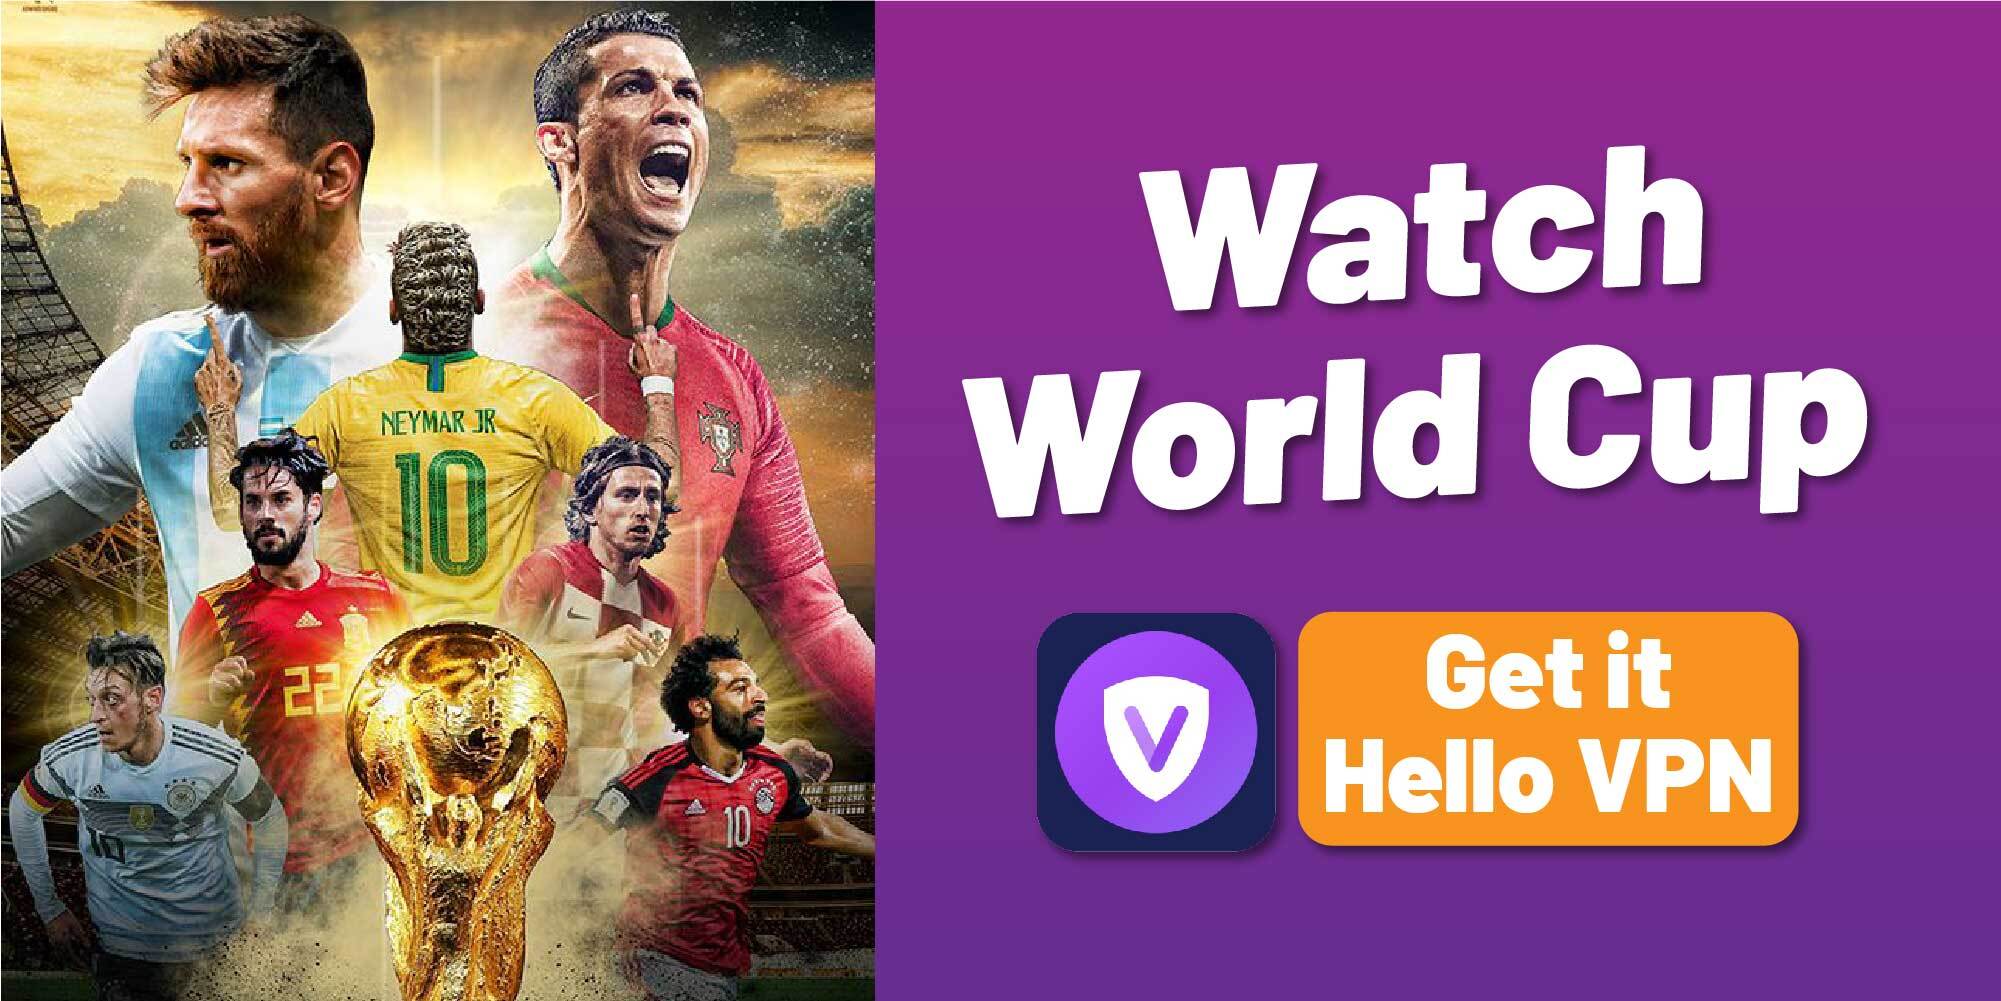 Where can I watch the World Cup in 2022? Hello VPN Blog